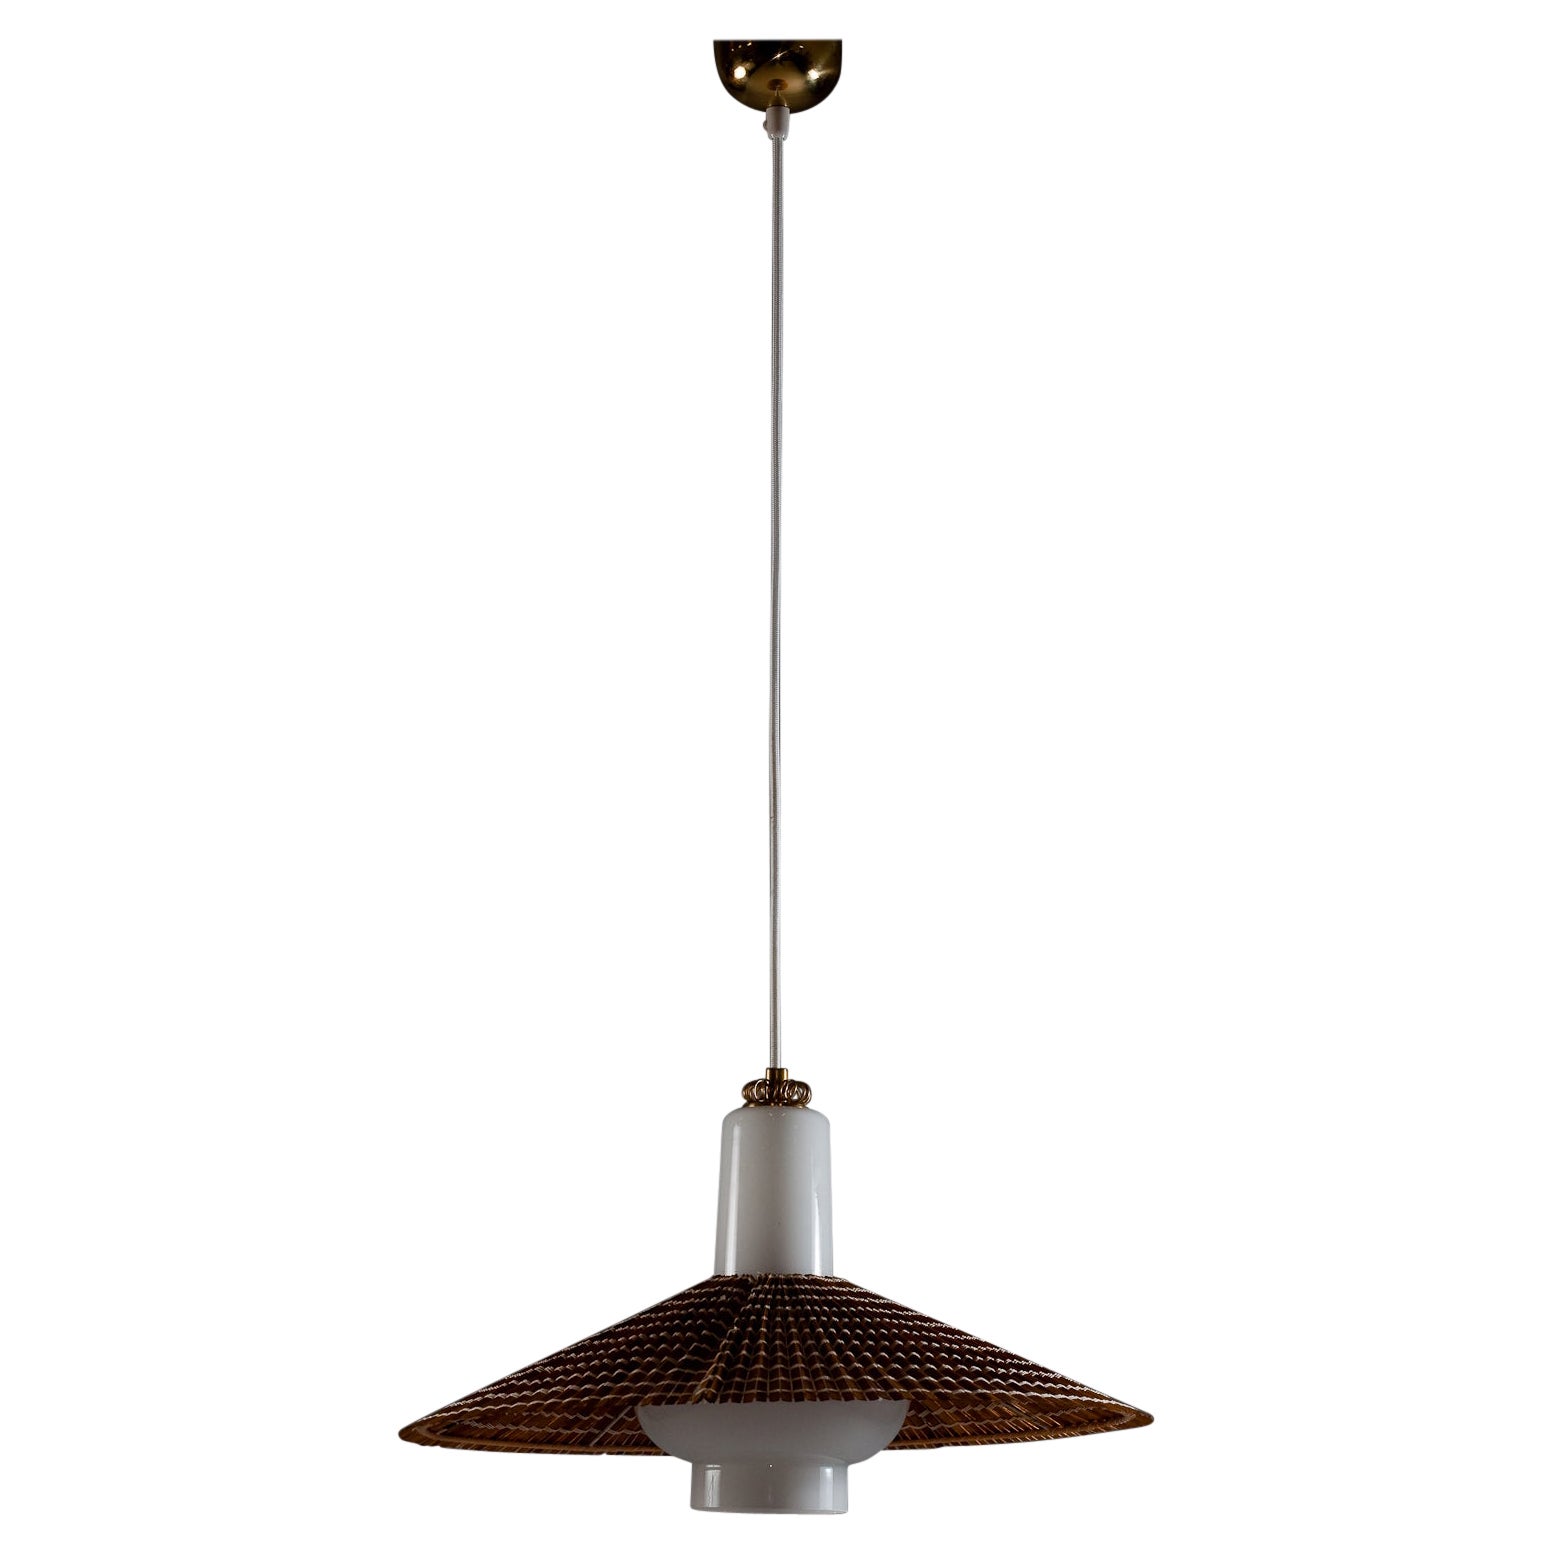 Illuminate your space with the timeless elegance of this 1950's opaline glass pendant by the iconic Paavo Tynell for Idman Oy. The pendant features a wooden slat shade that adds a touch of rustic charm to its design. The opaline glass casts a warm